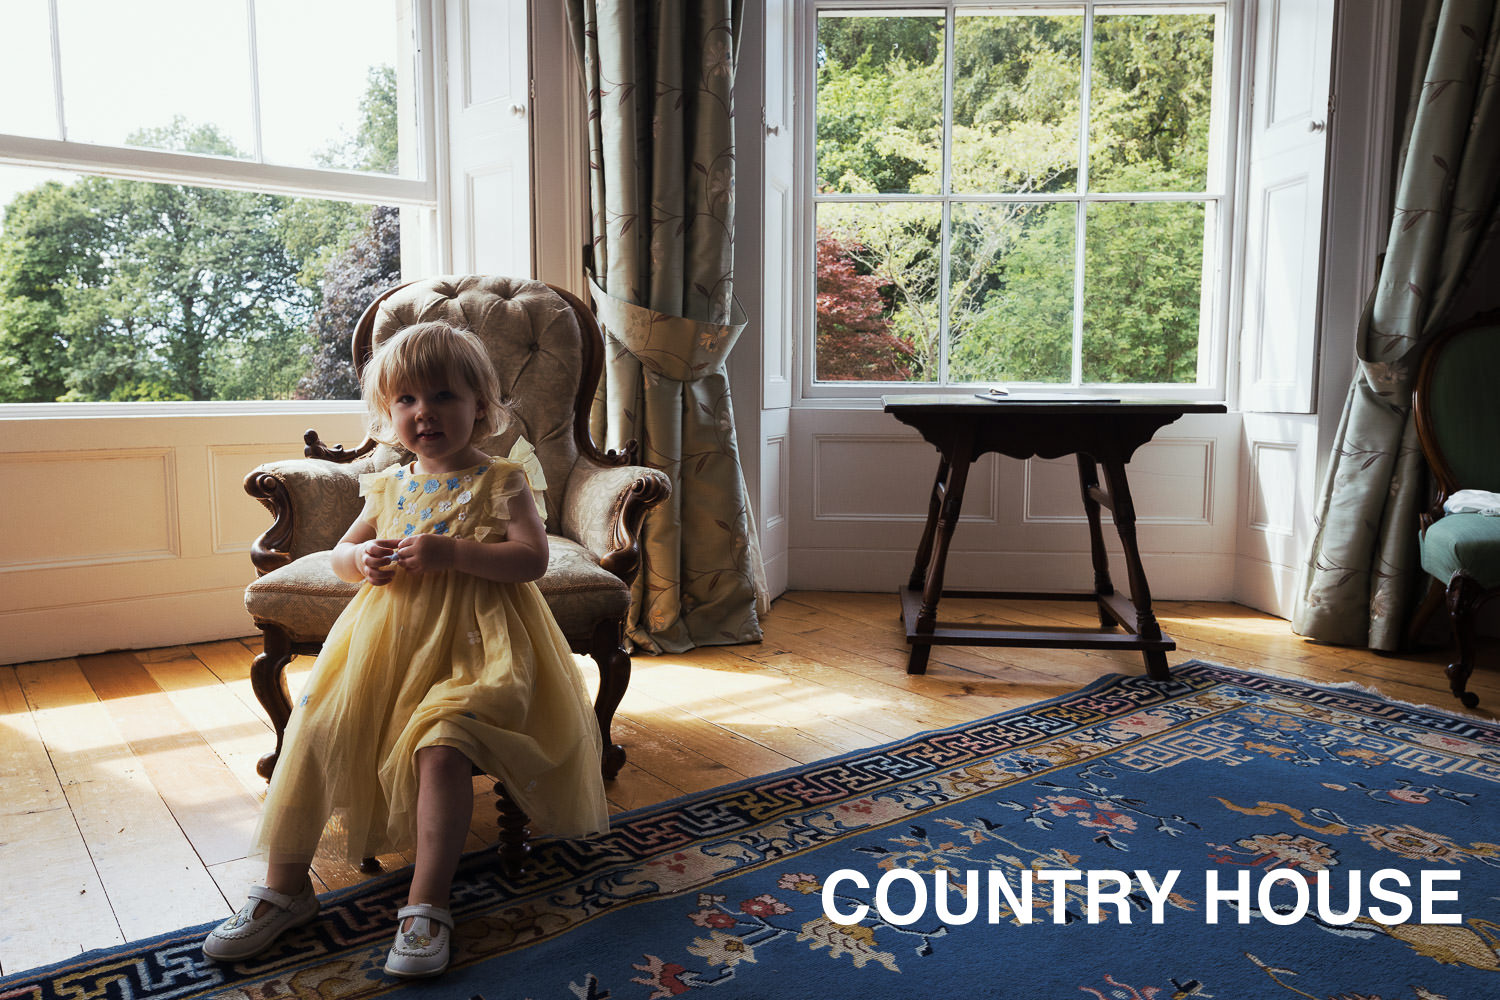 Documentary style wedding photograph at a country house wedding.

A little girl in a yellow dress is sitting on a stool in the bedroom of a wedding venue called Homme House. There are windows and trees in the background.JoJo Maman Bébé Floral Yellow Floral Tulle Party Dress.